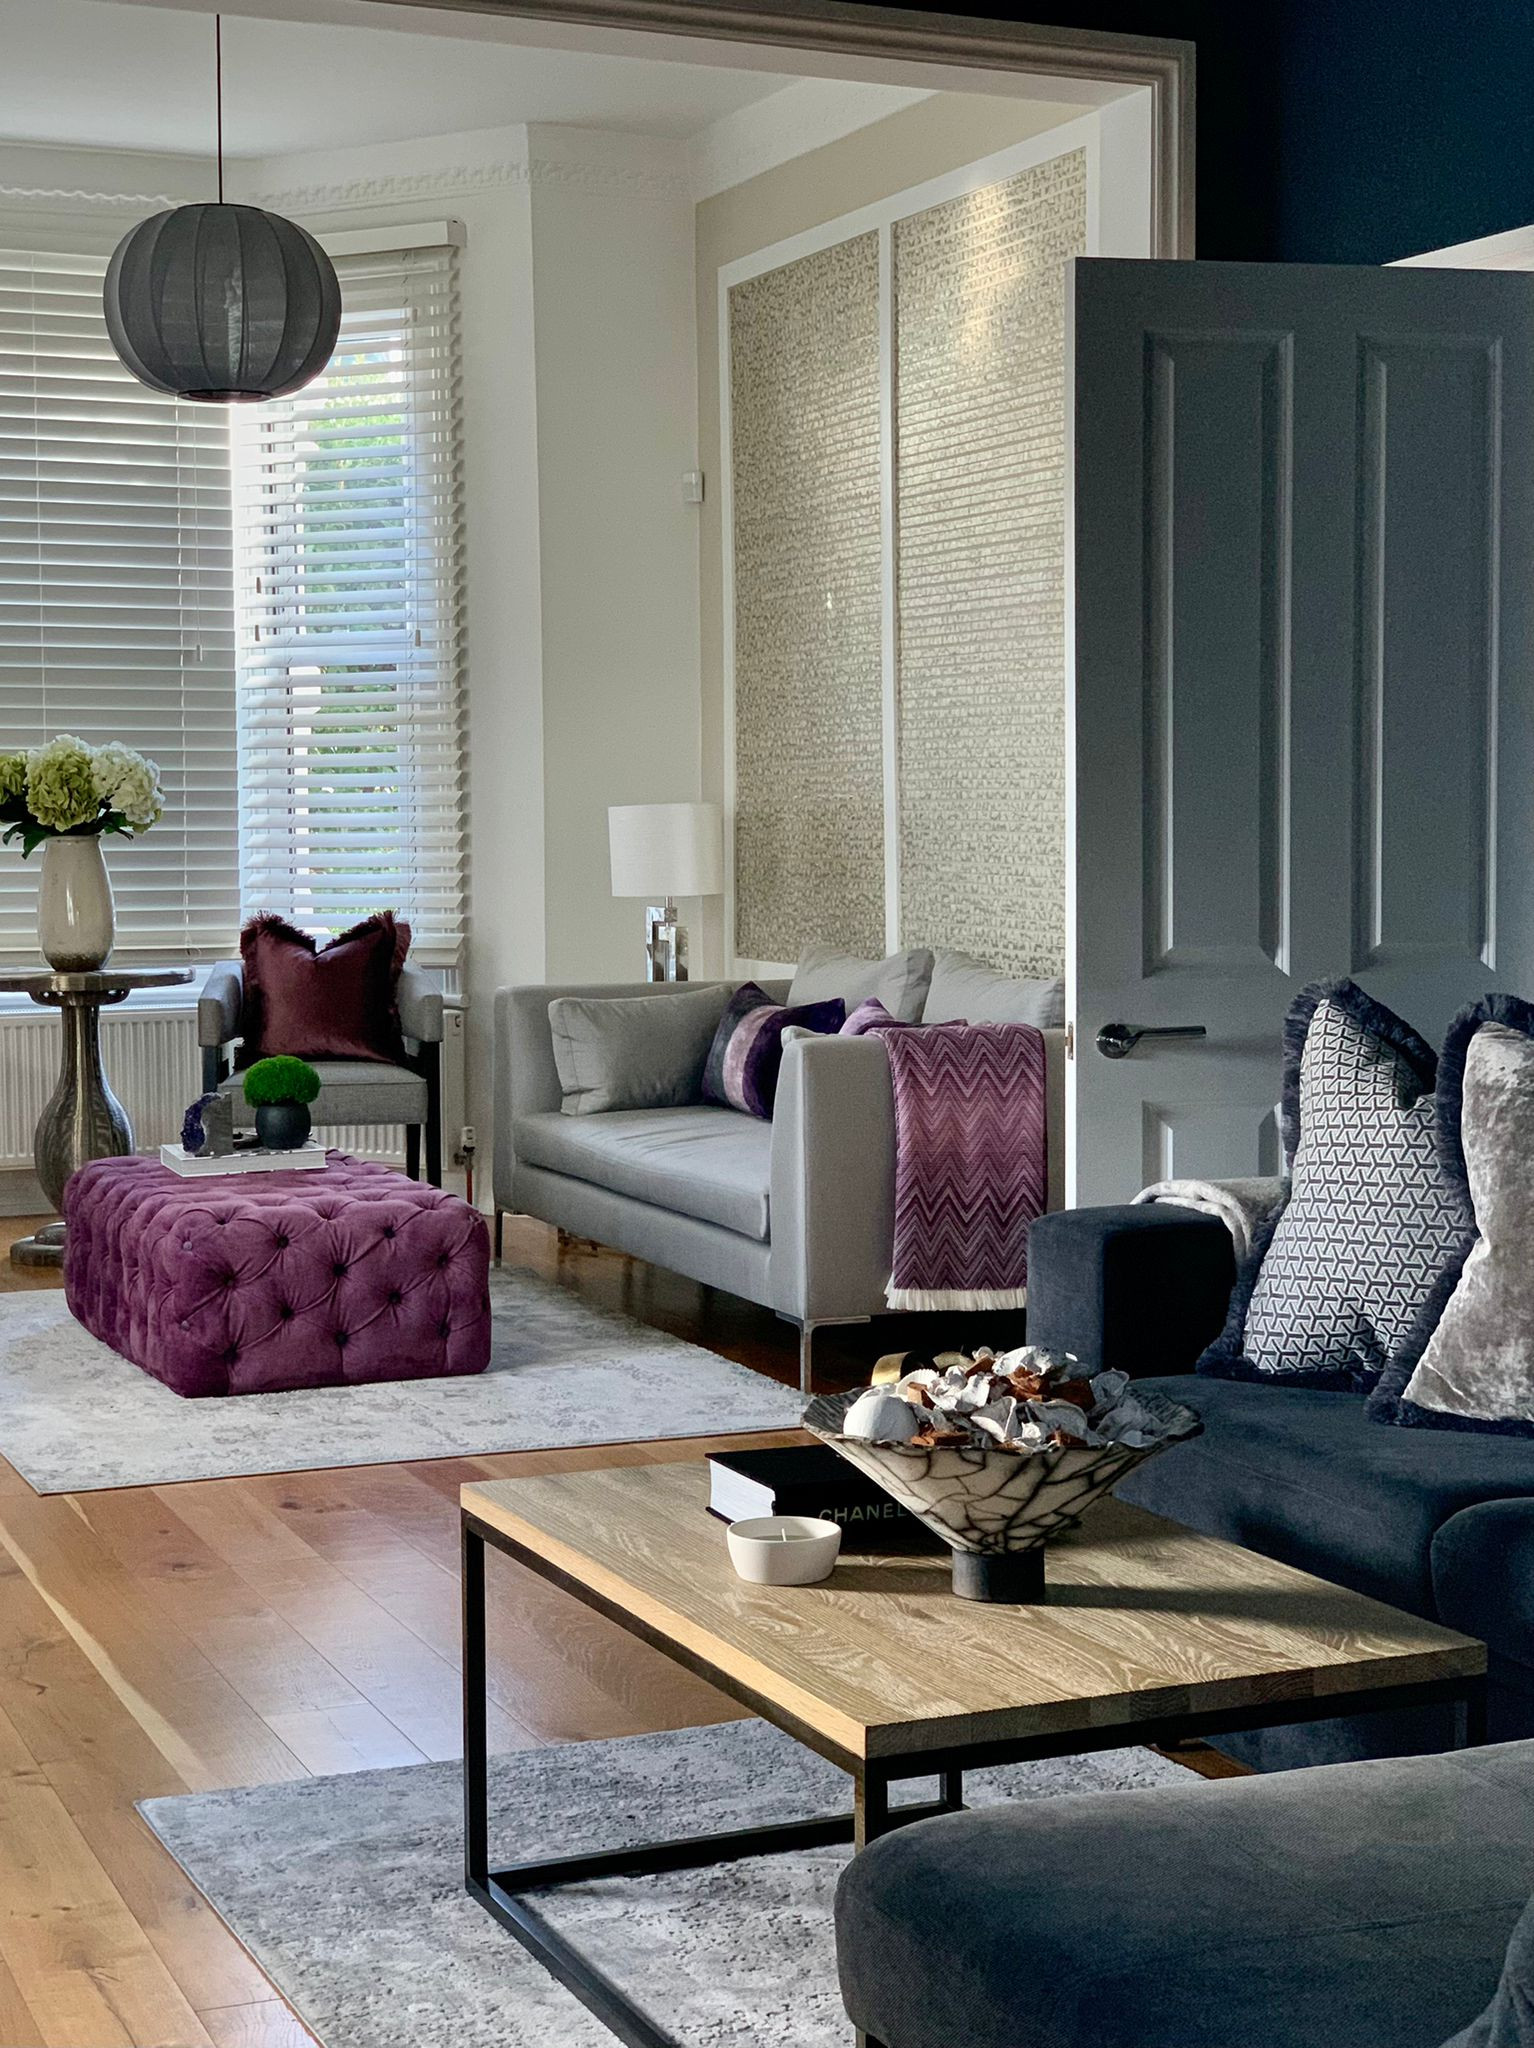 double aspect reception living Tv rooms had a complete transformation with neutral grey base and luxurious purple accents: